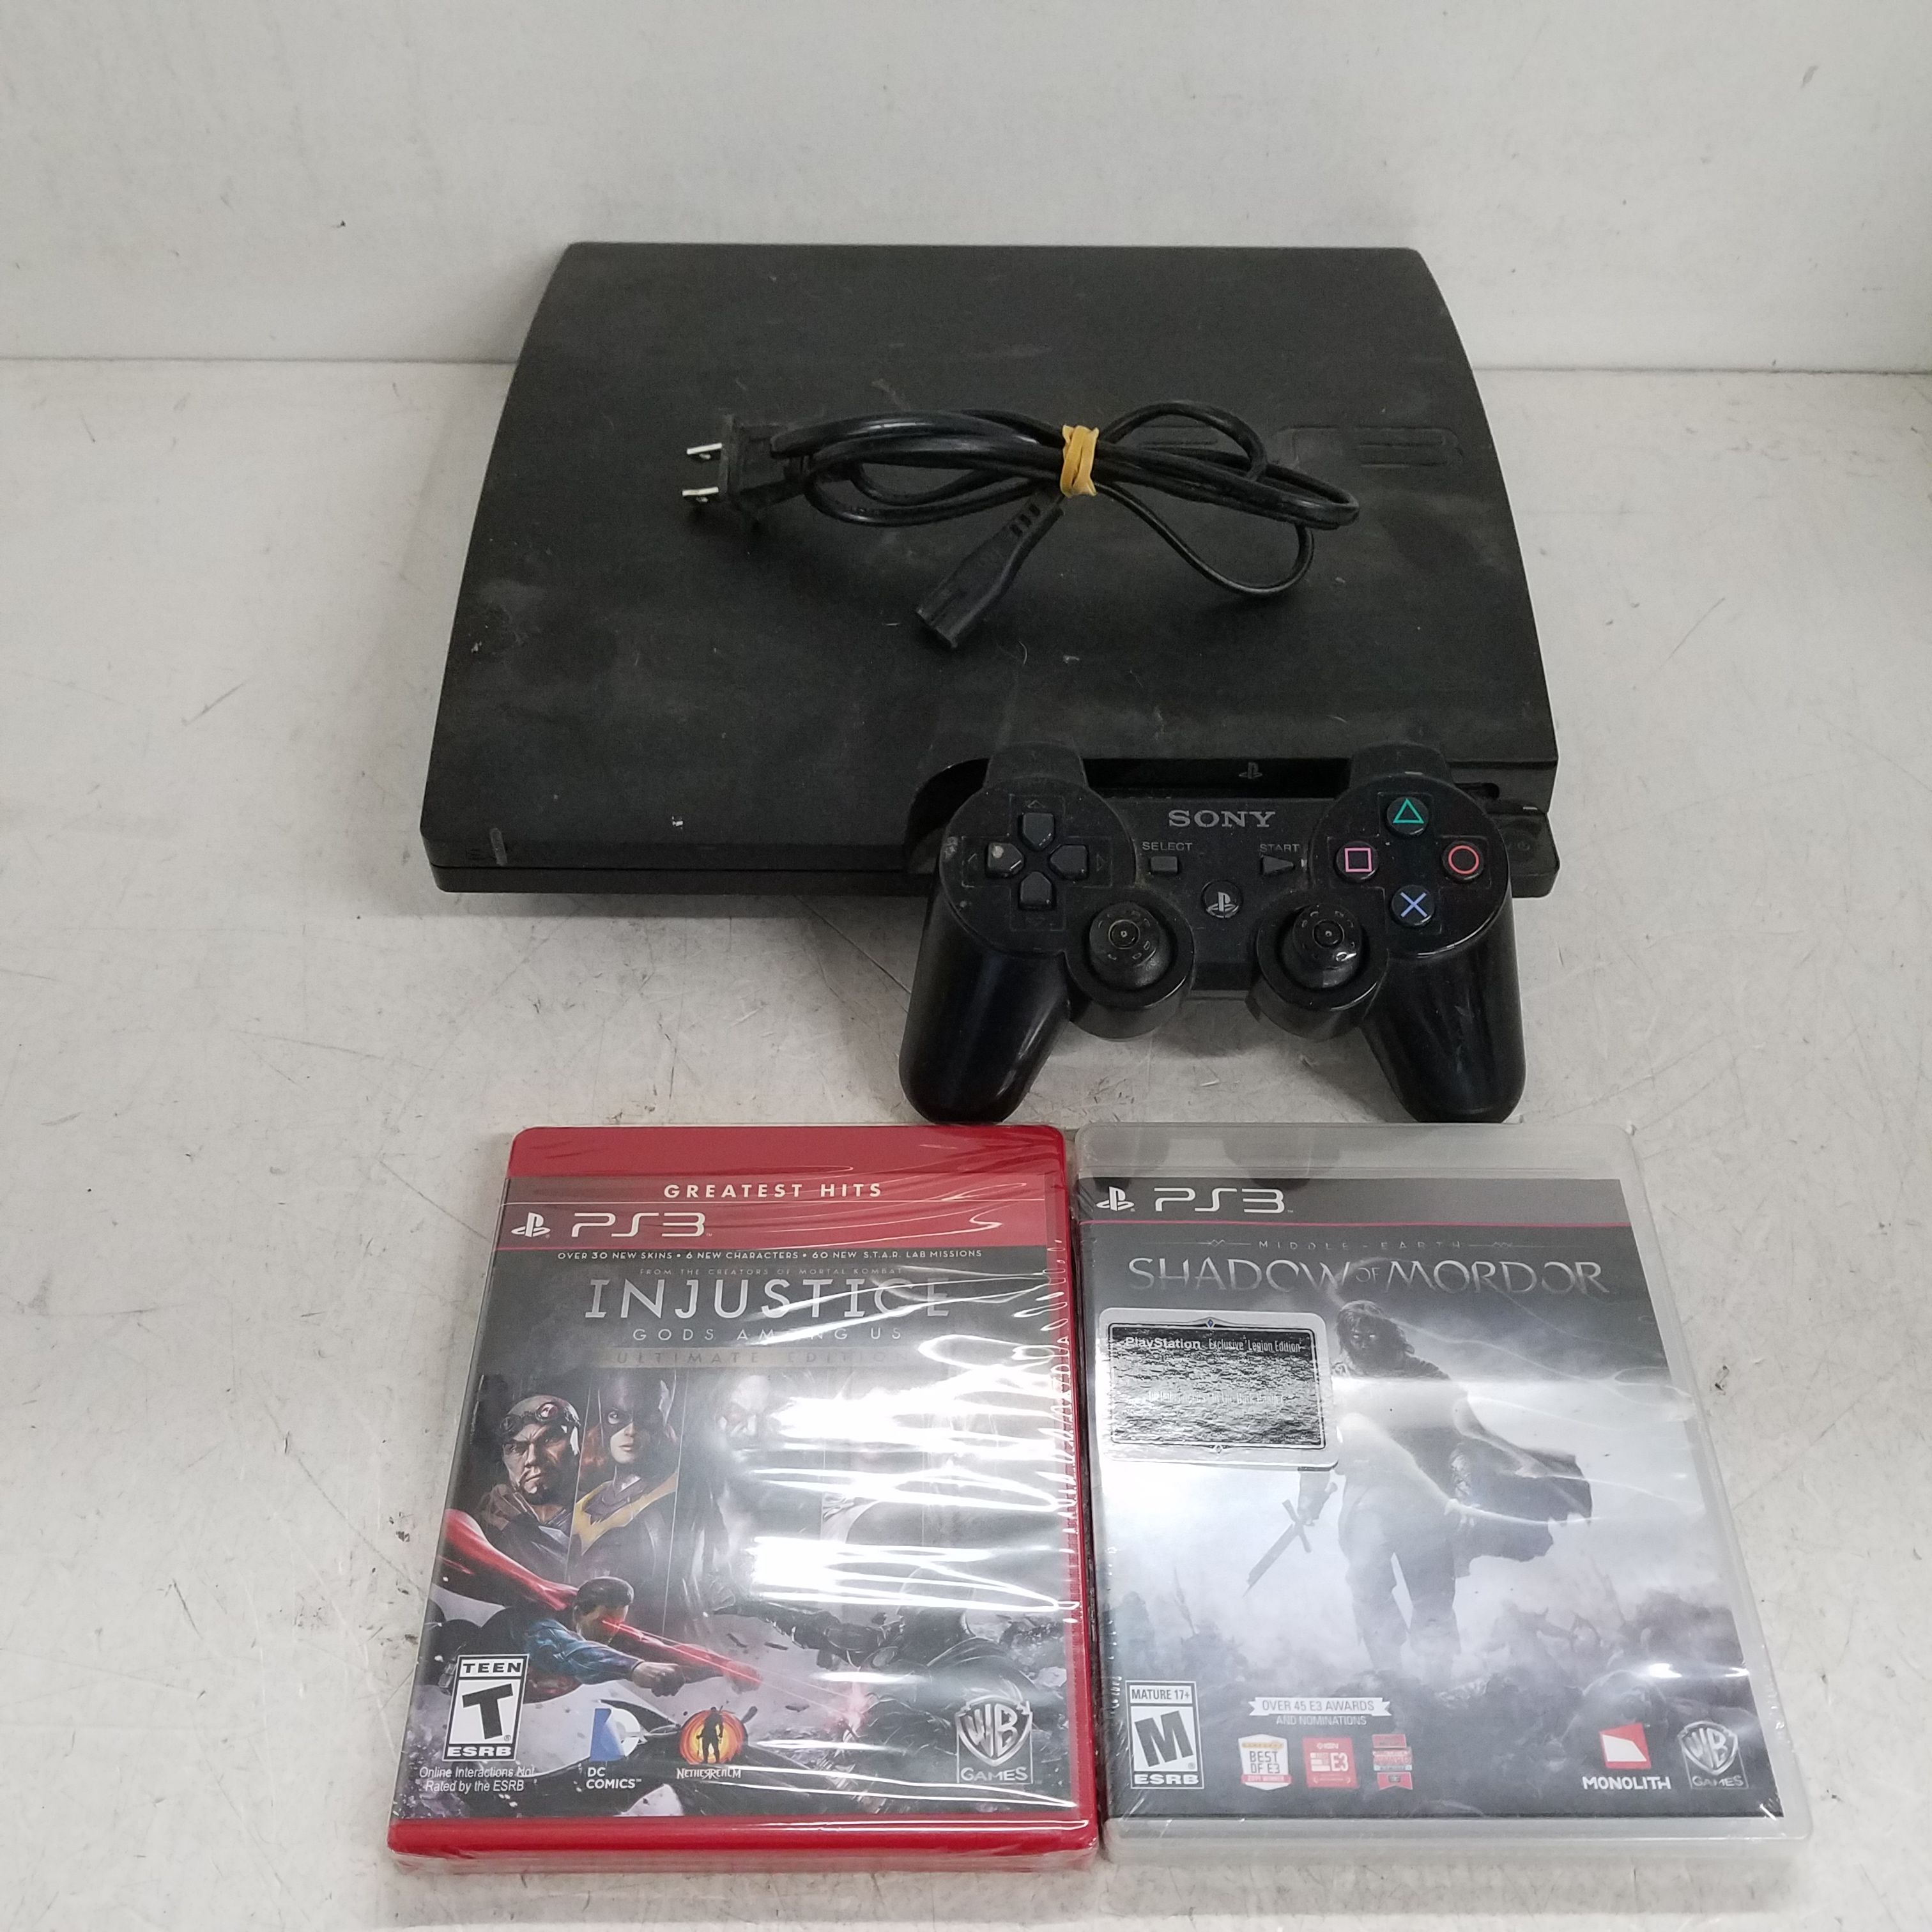 PlayStation 3 - 320 GB System/PlayStation Bundle (Used/Pre-Owned) 